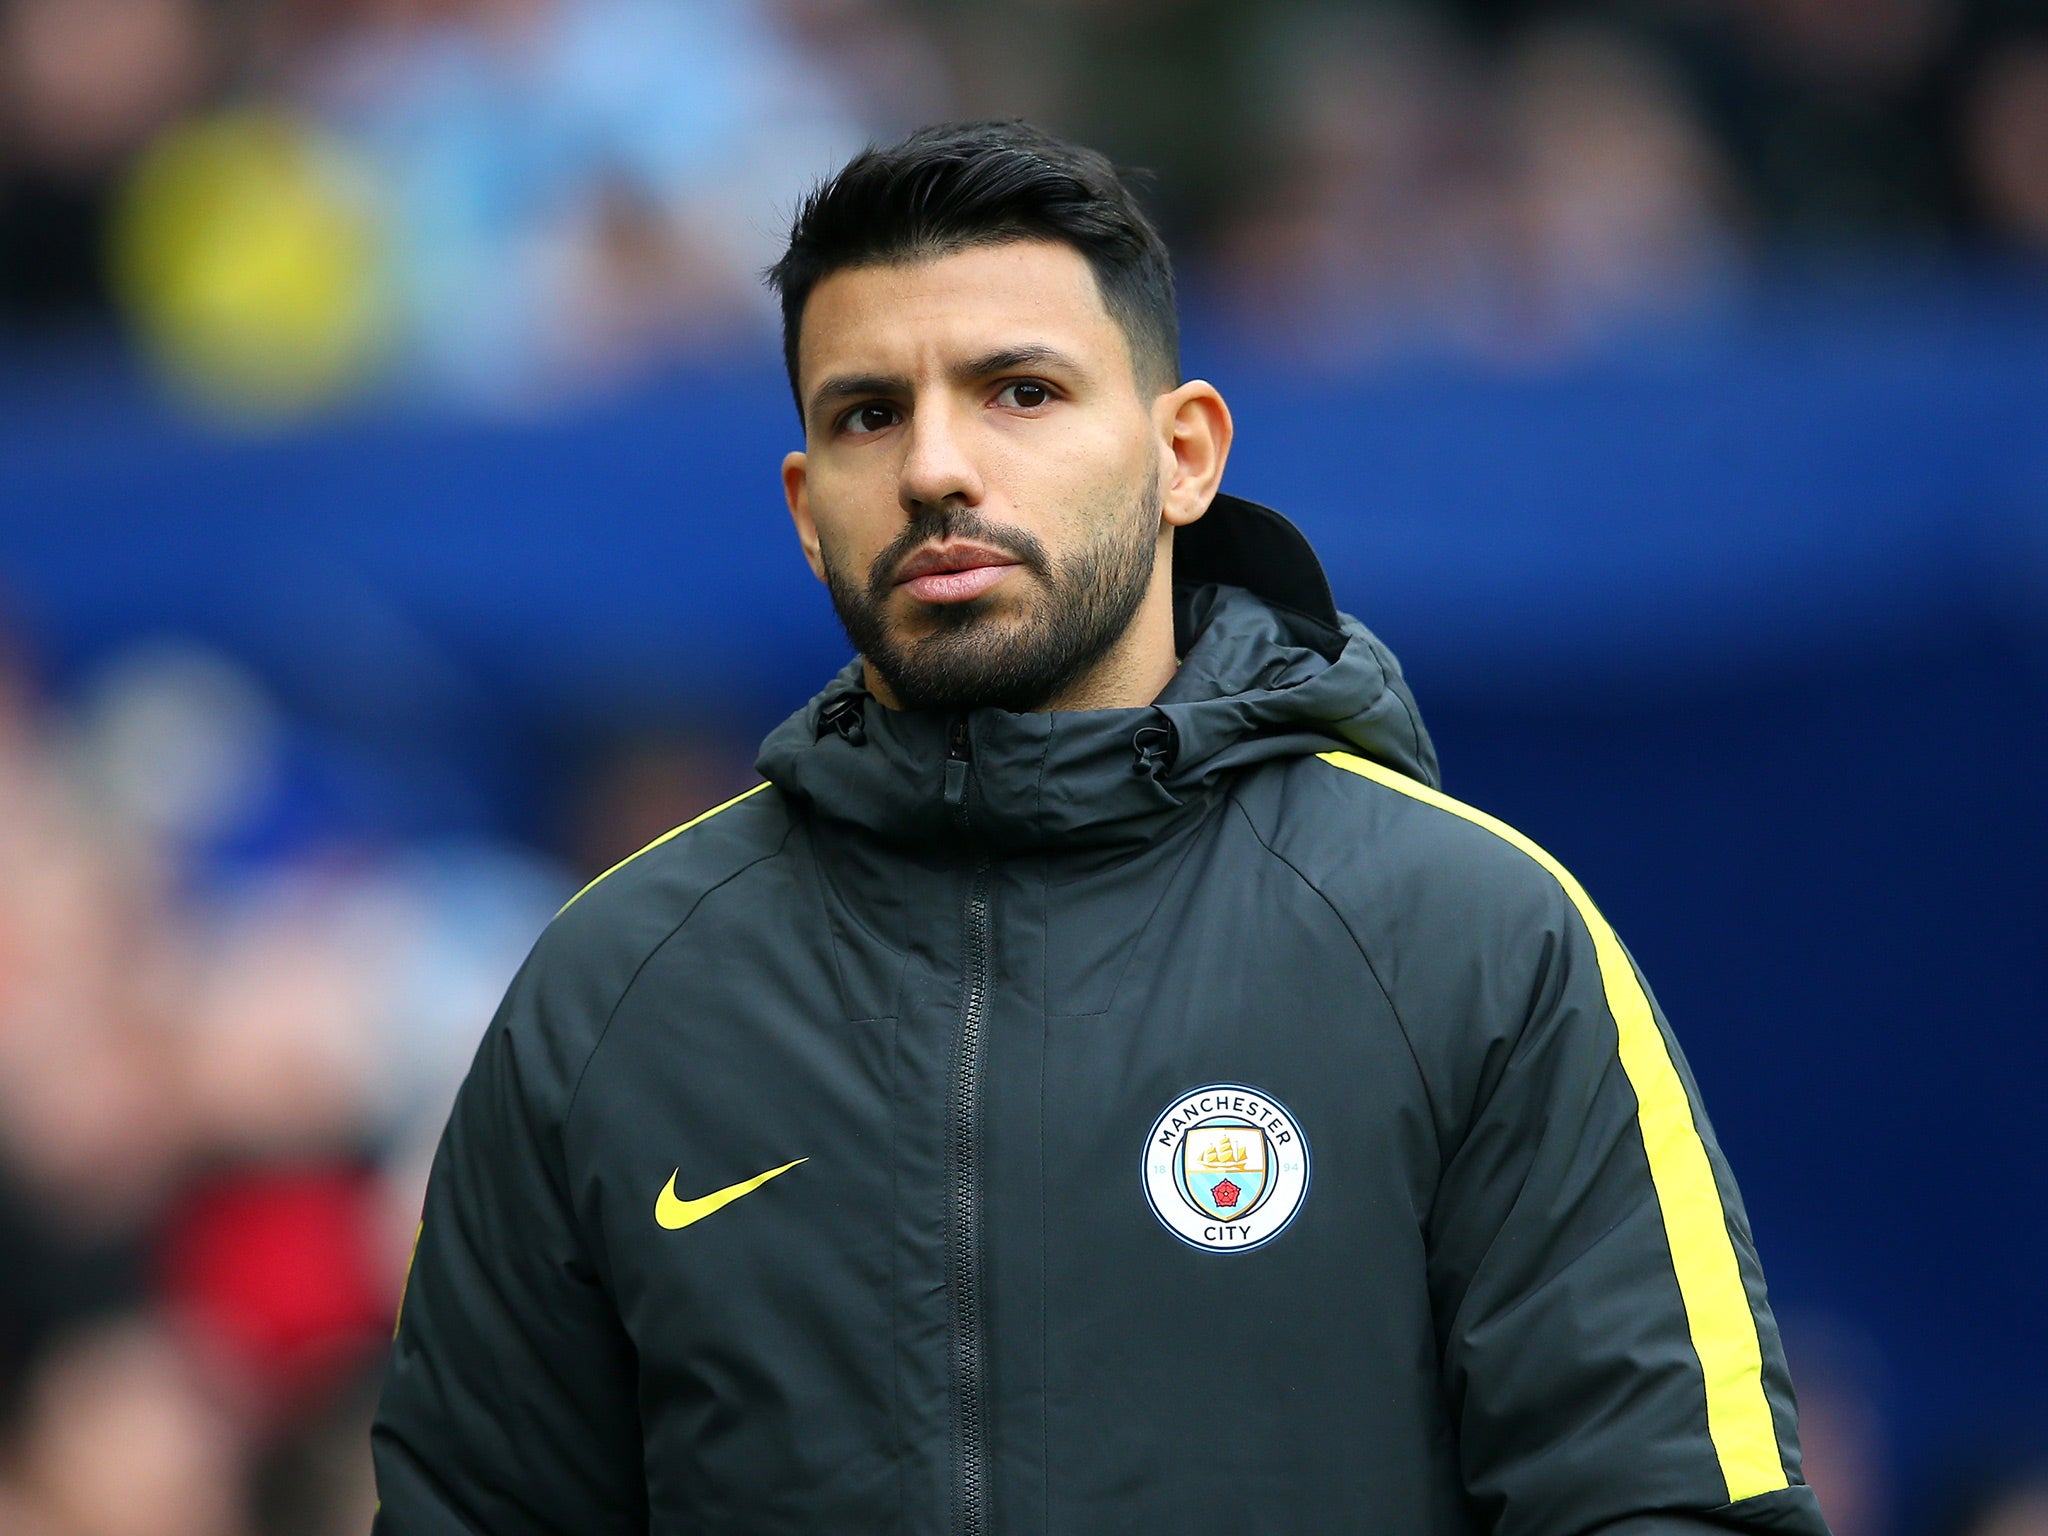 Sergio Aguero was named among the substitutes again for Manchester City's win over Swansea